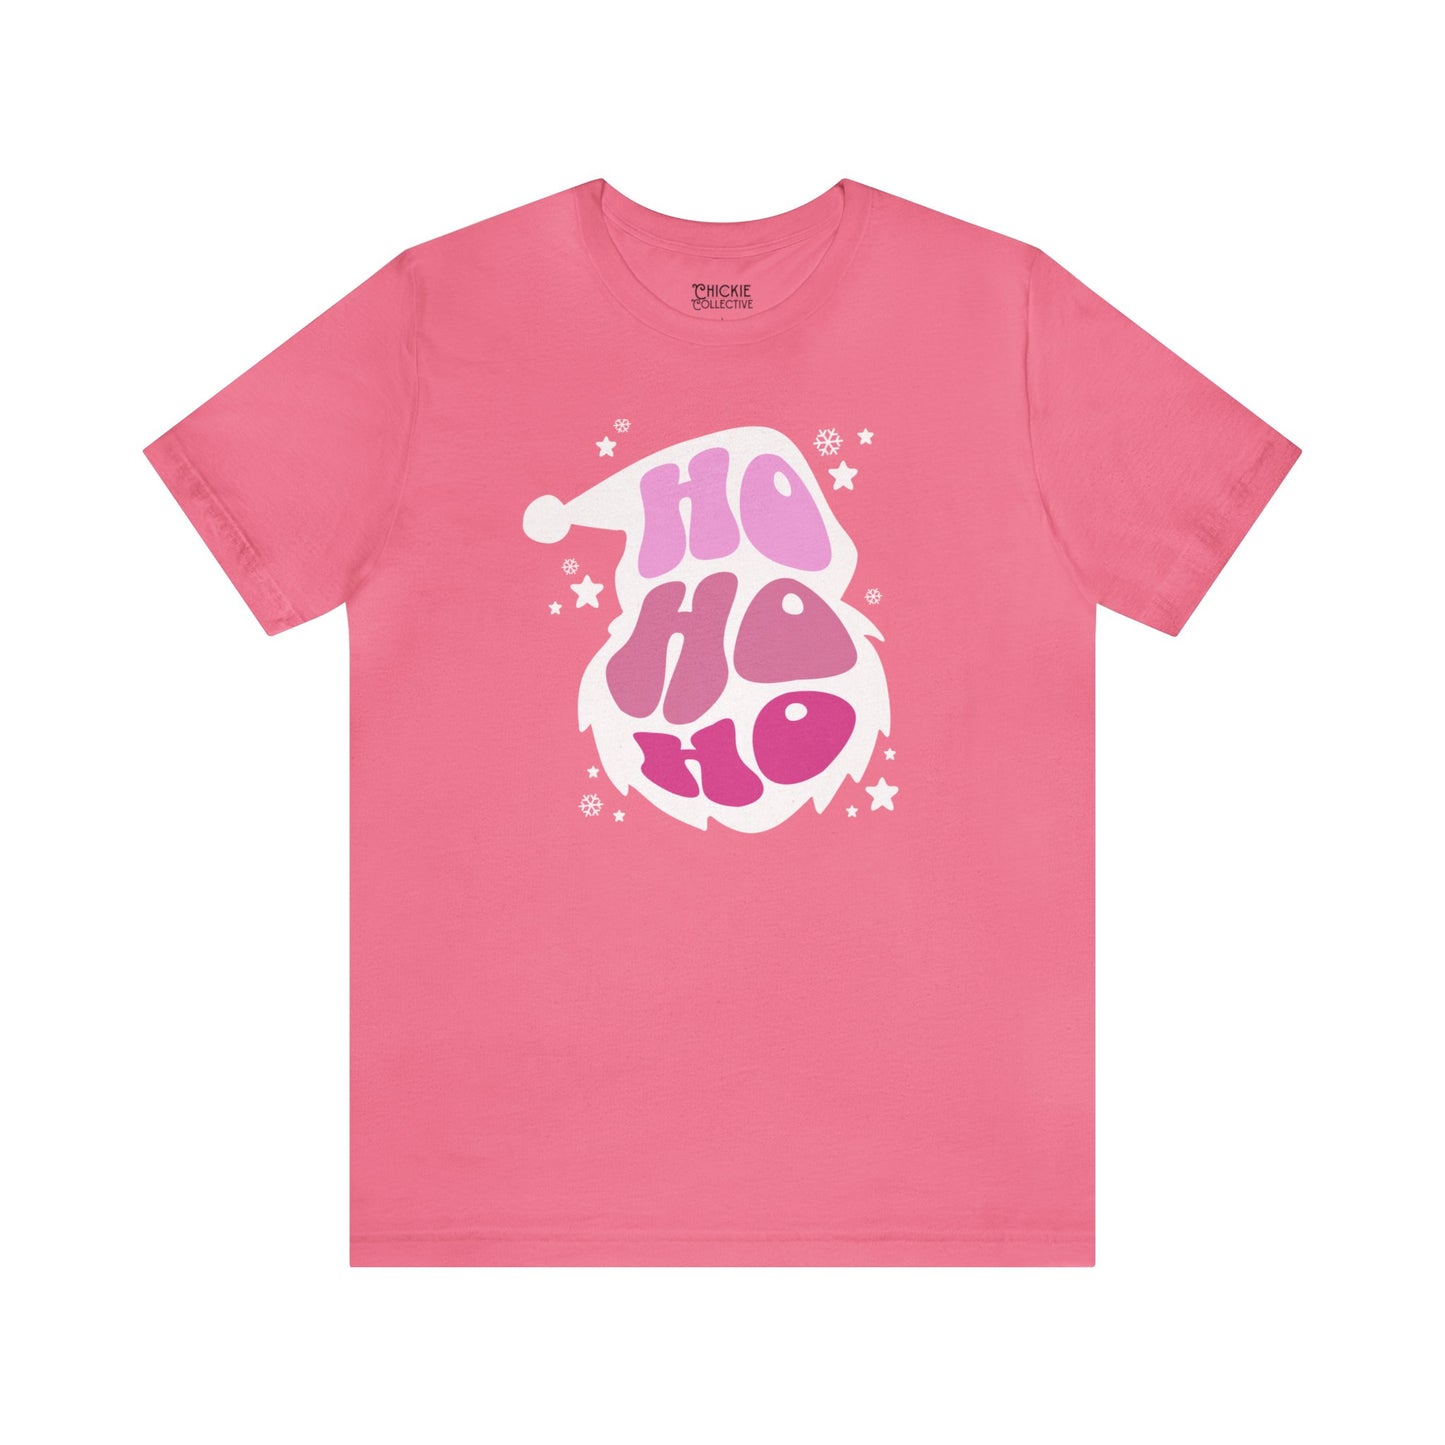 Unisex Jersey Short Sleeve Tee T-Shirt Charity Pink S  - Chickie Collective